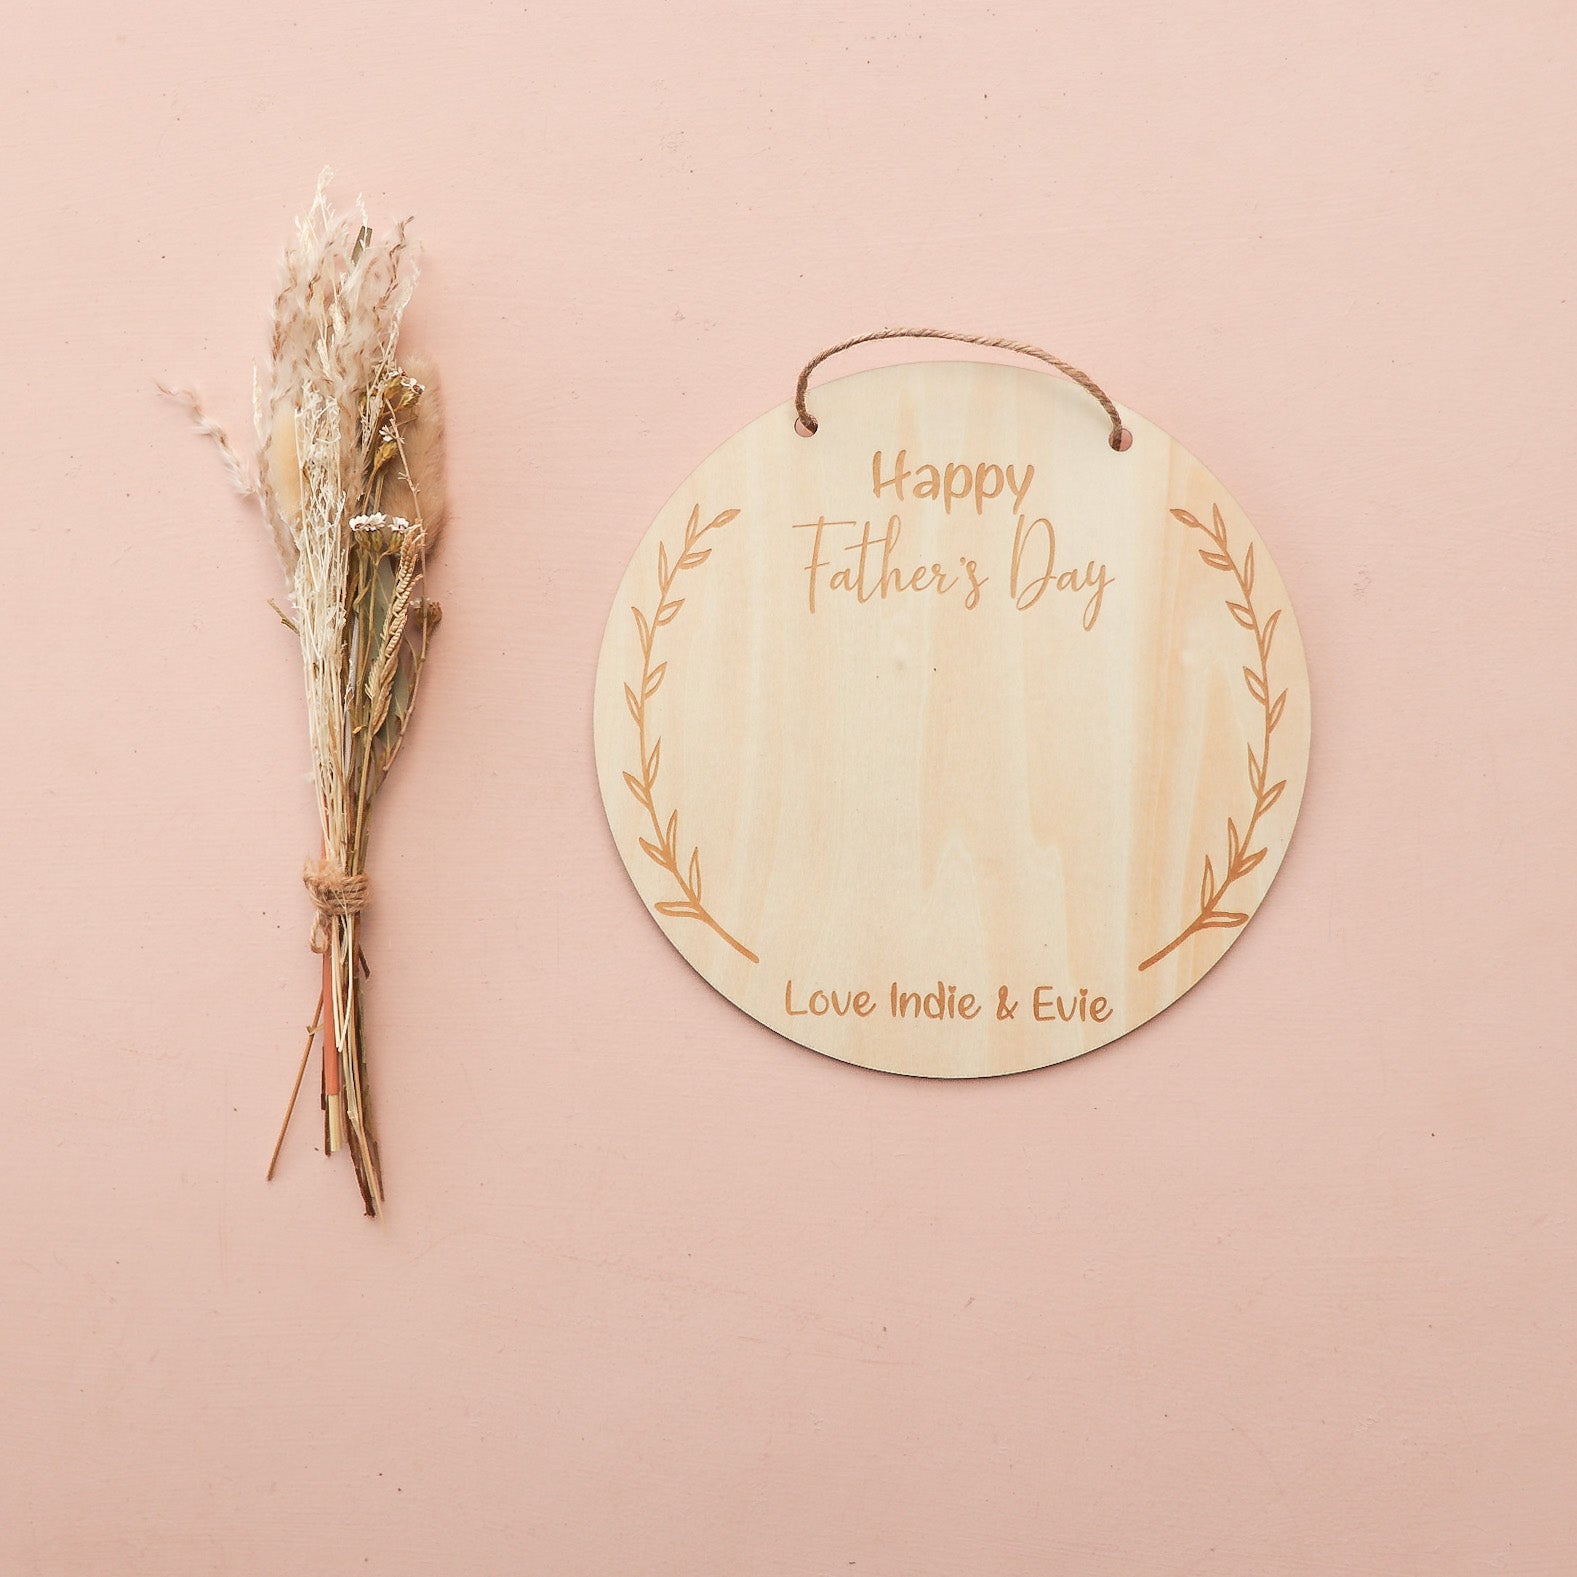 Father's Day Photo Plaque - Happy Father's Day